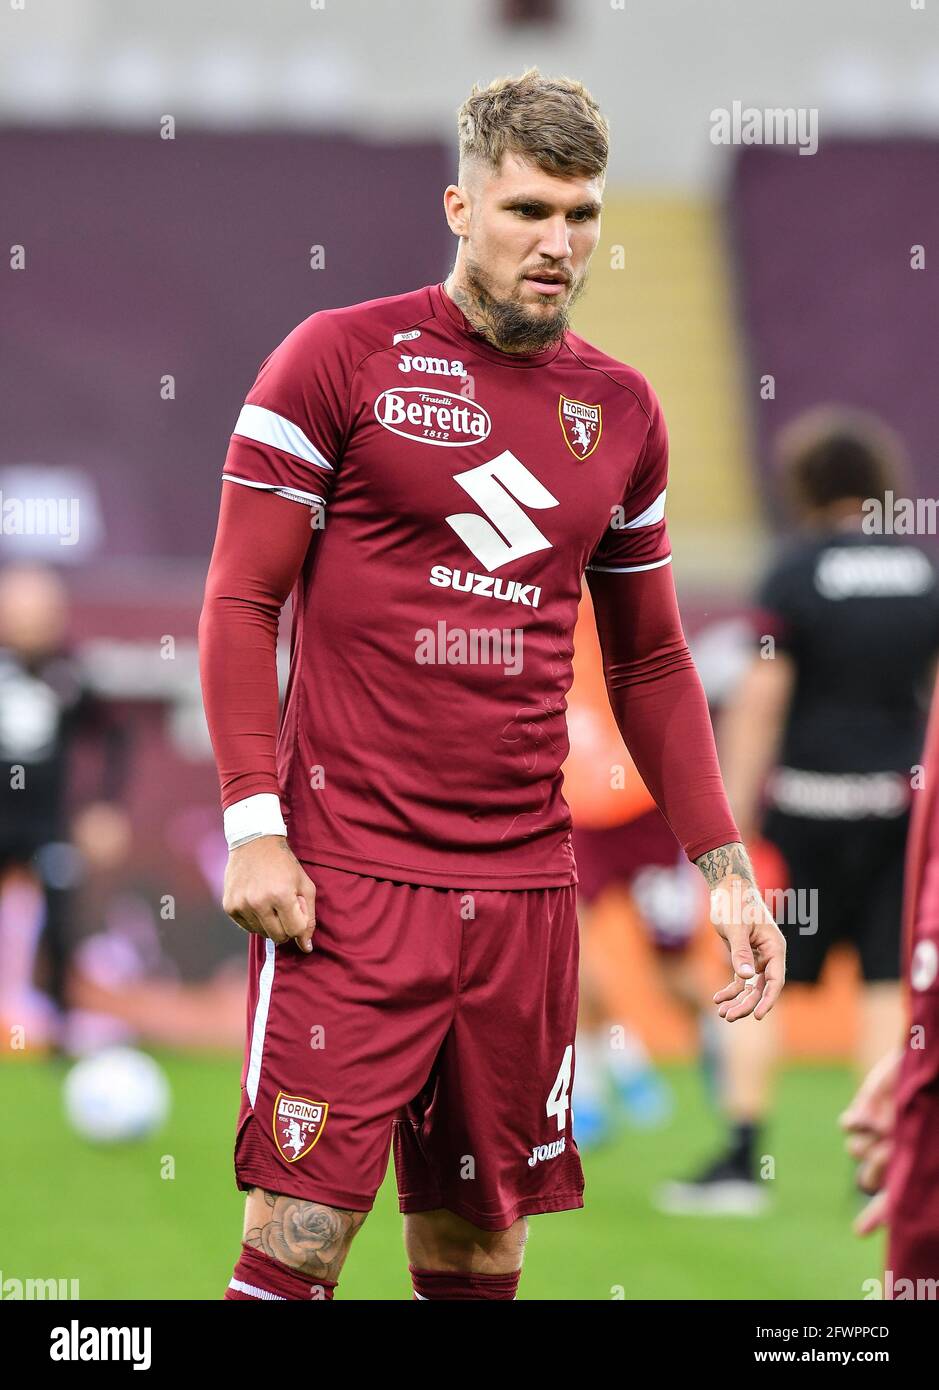 Santa Cristina Gherdeina, Italy. 24 July 2021. Lyanco Vojnovic (R) of Torino  FC competes for the ball with Emanuele Bocchio of SSC Brixen during the  pre-season friendly football match between Torino FC